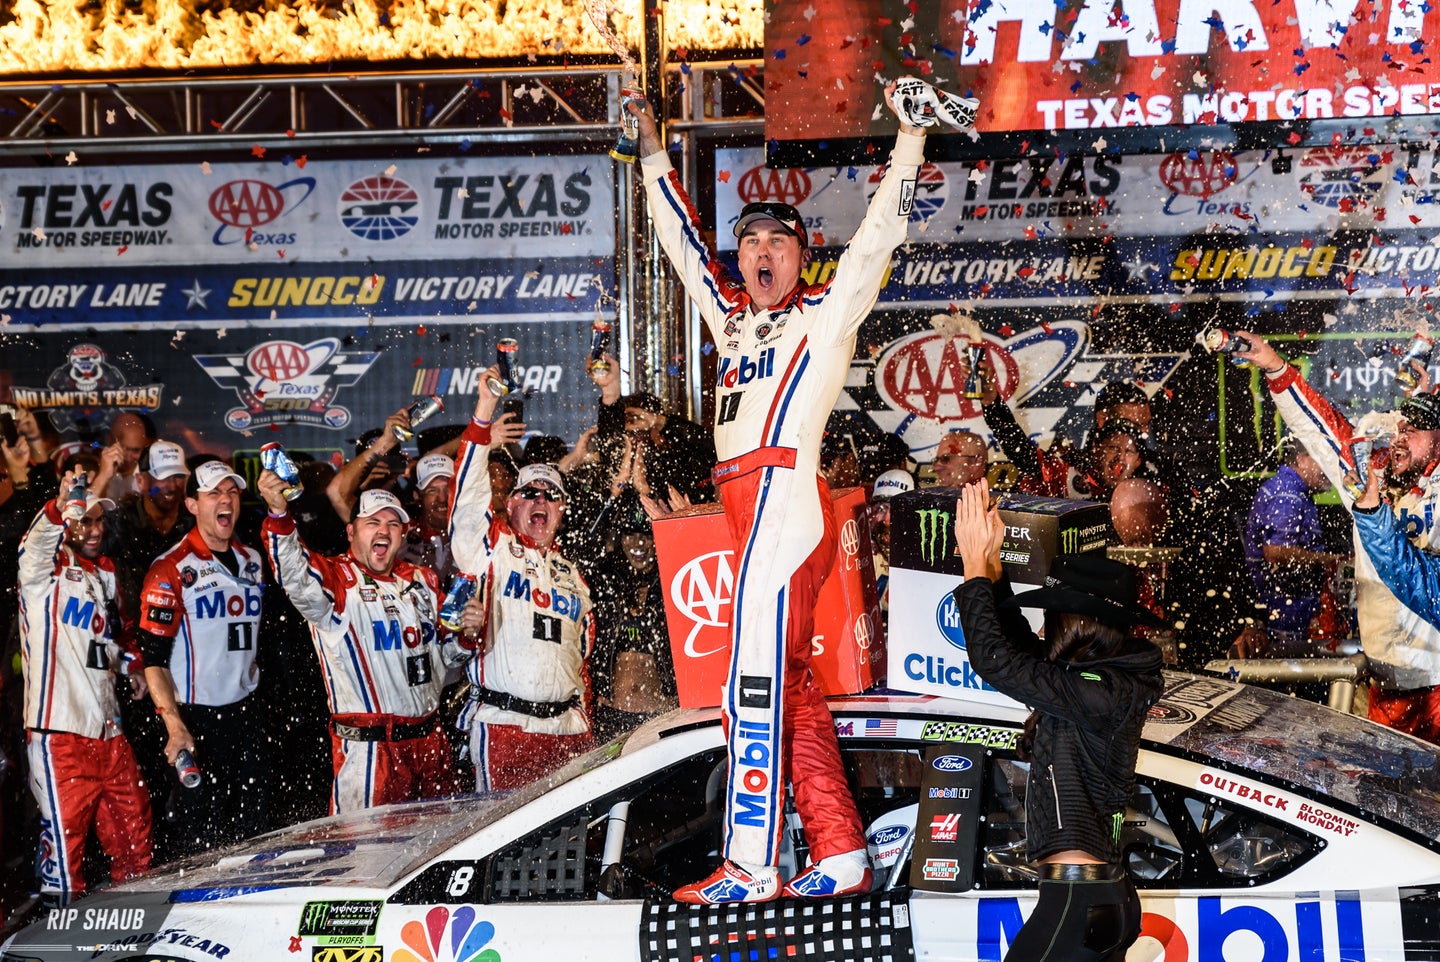 Kevin Harvick Sweeps NASCAR Cup Series Race in Texas, Advances to Final 4 Championship Round